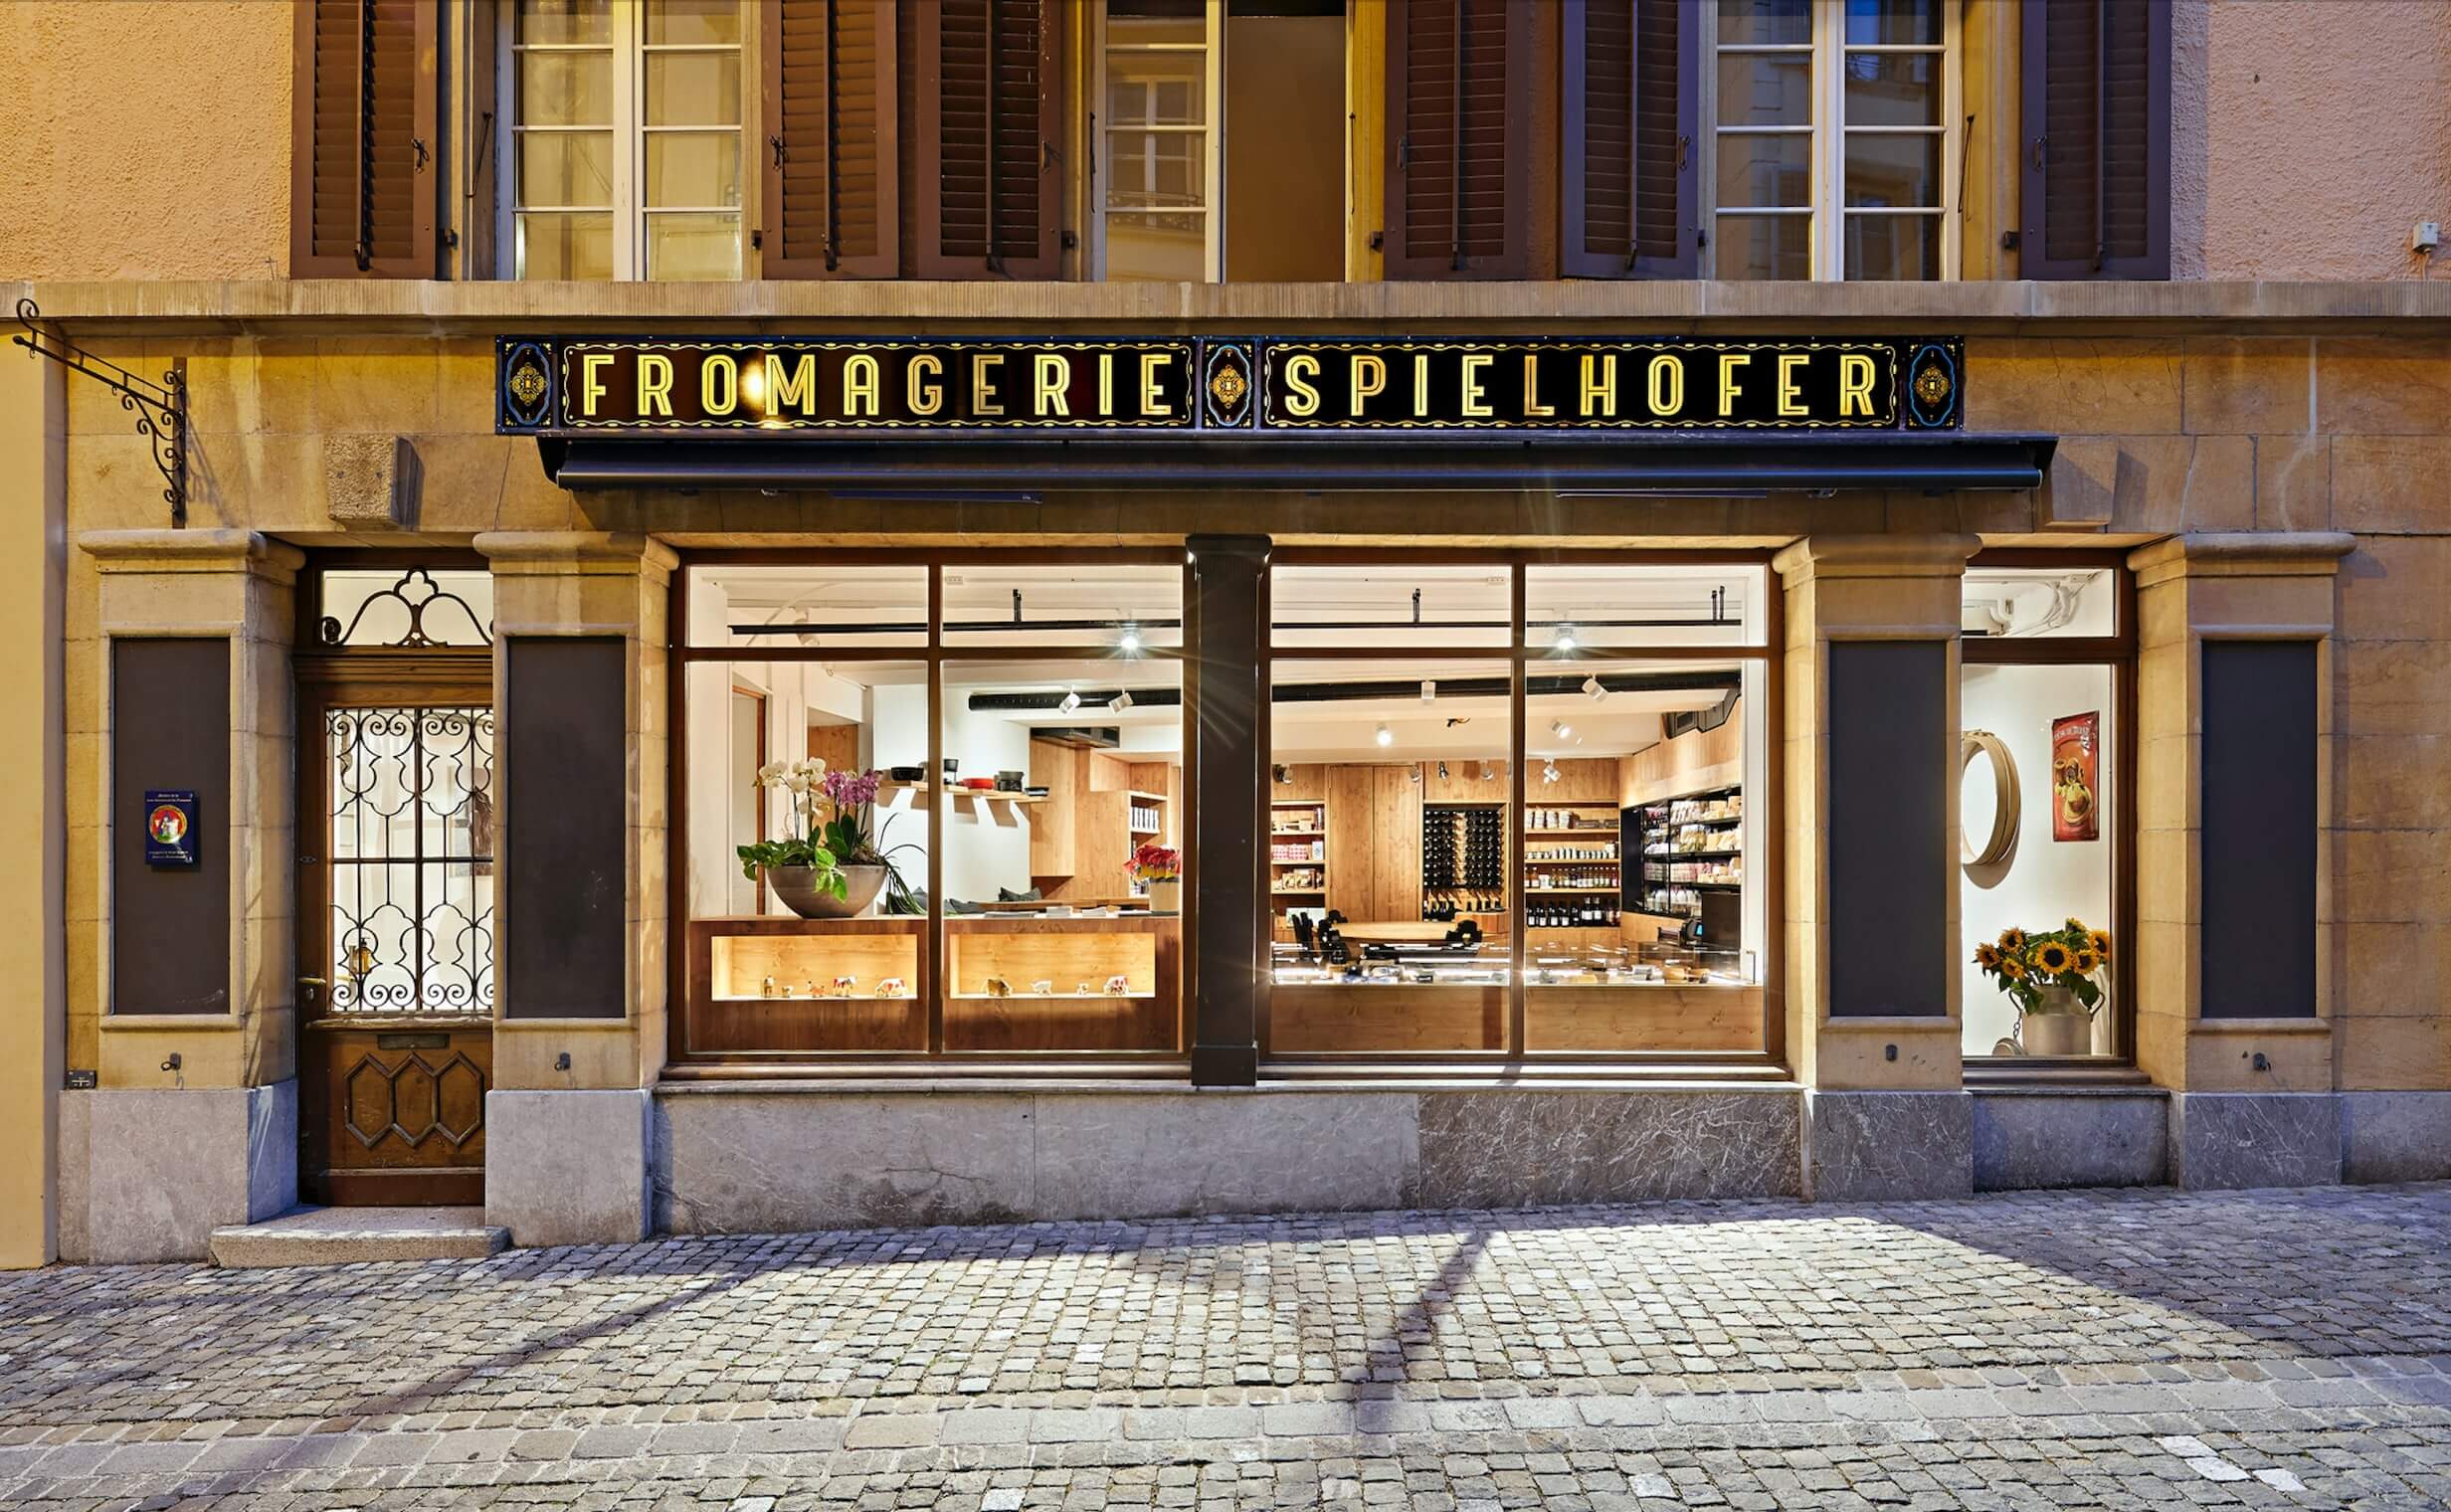 Authos architects designed the entire Fromagerie Spielhofer